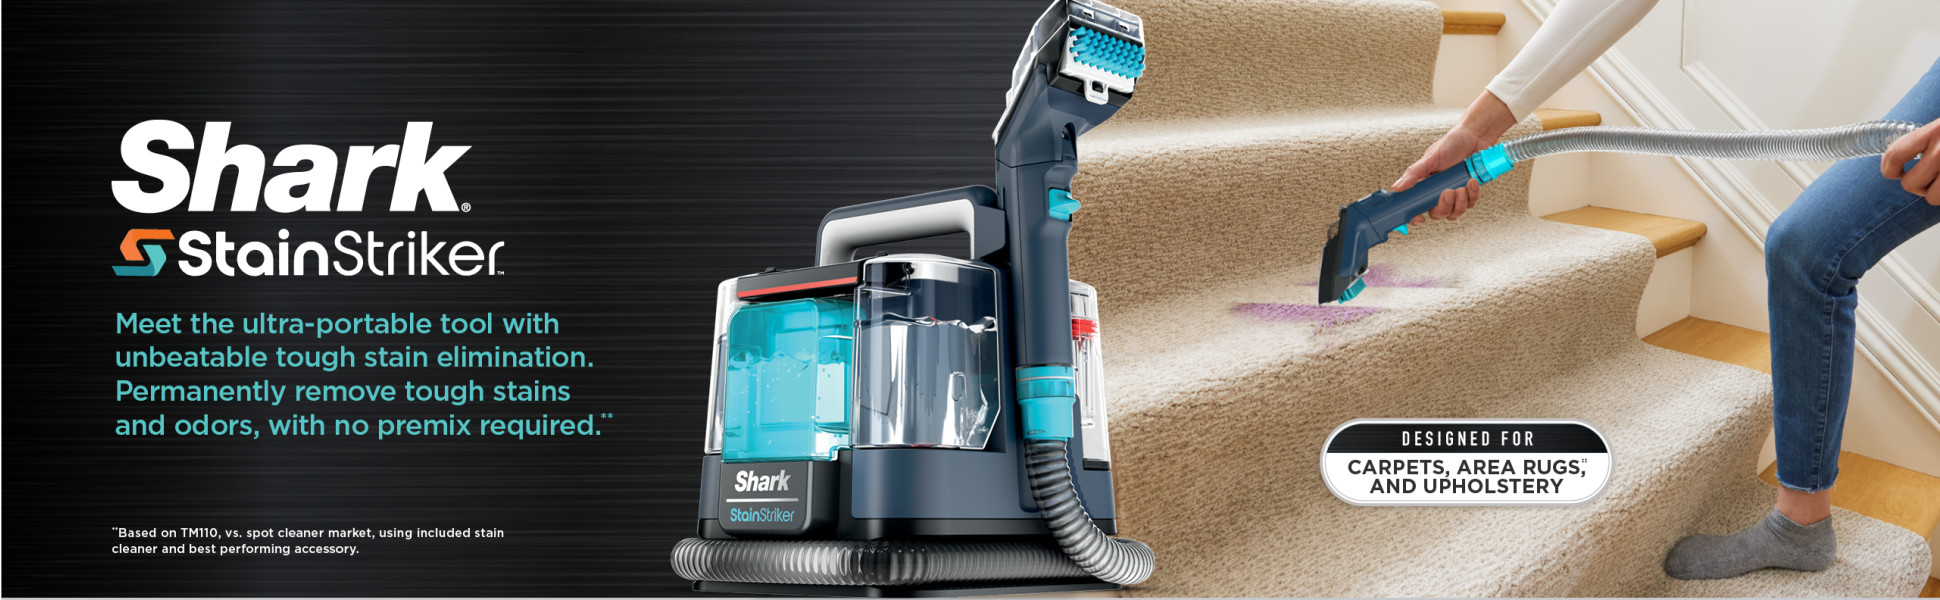 Shark StainStriker Portable Carpet and Upholstery Cleaner, Spot, Stain, and Odor Eliminator for Use on Carpets, Area Rugs, Couches, Upholstery, Cars